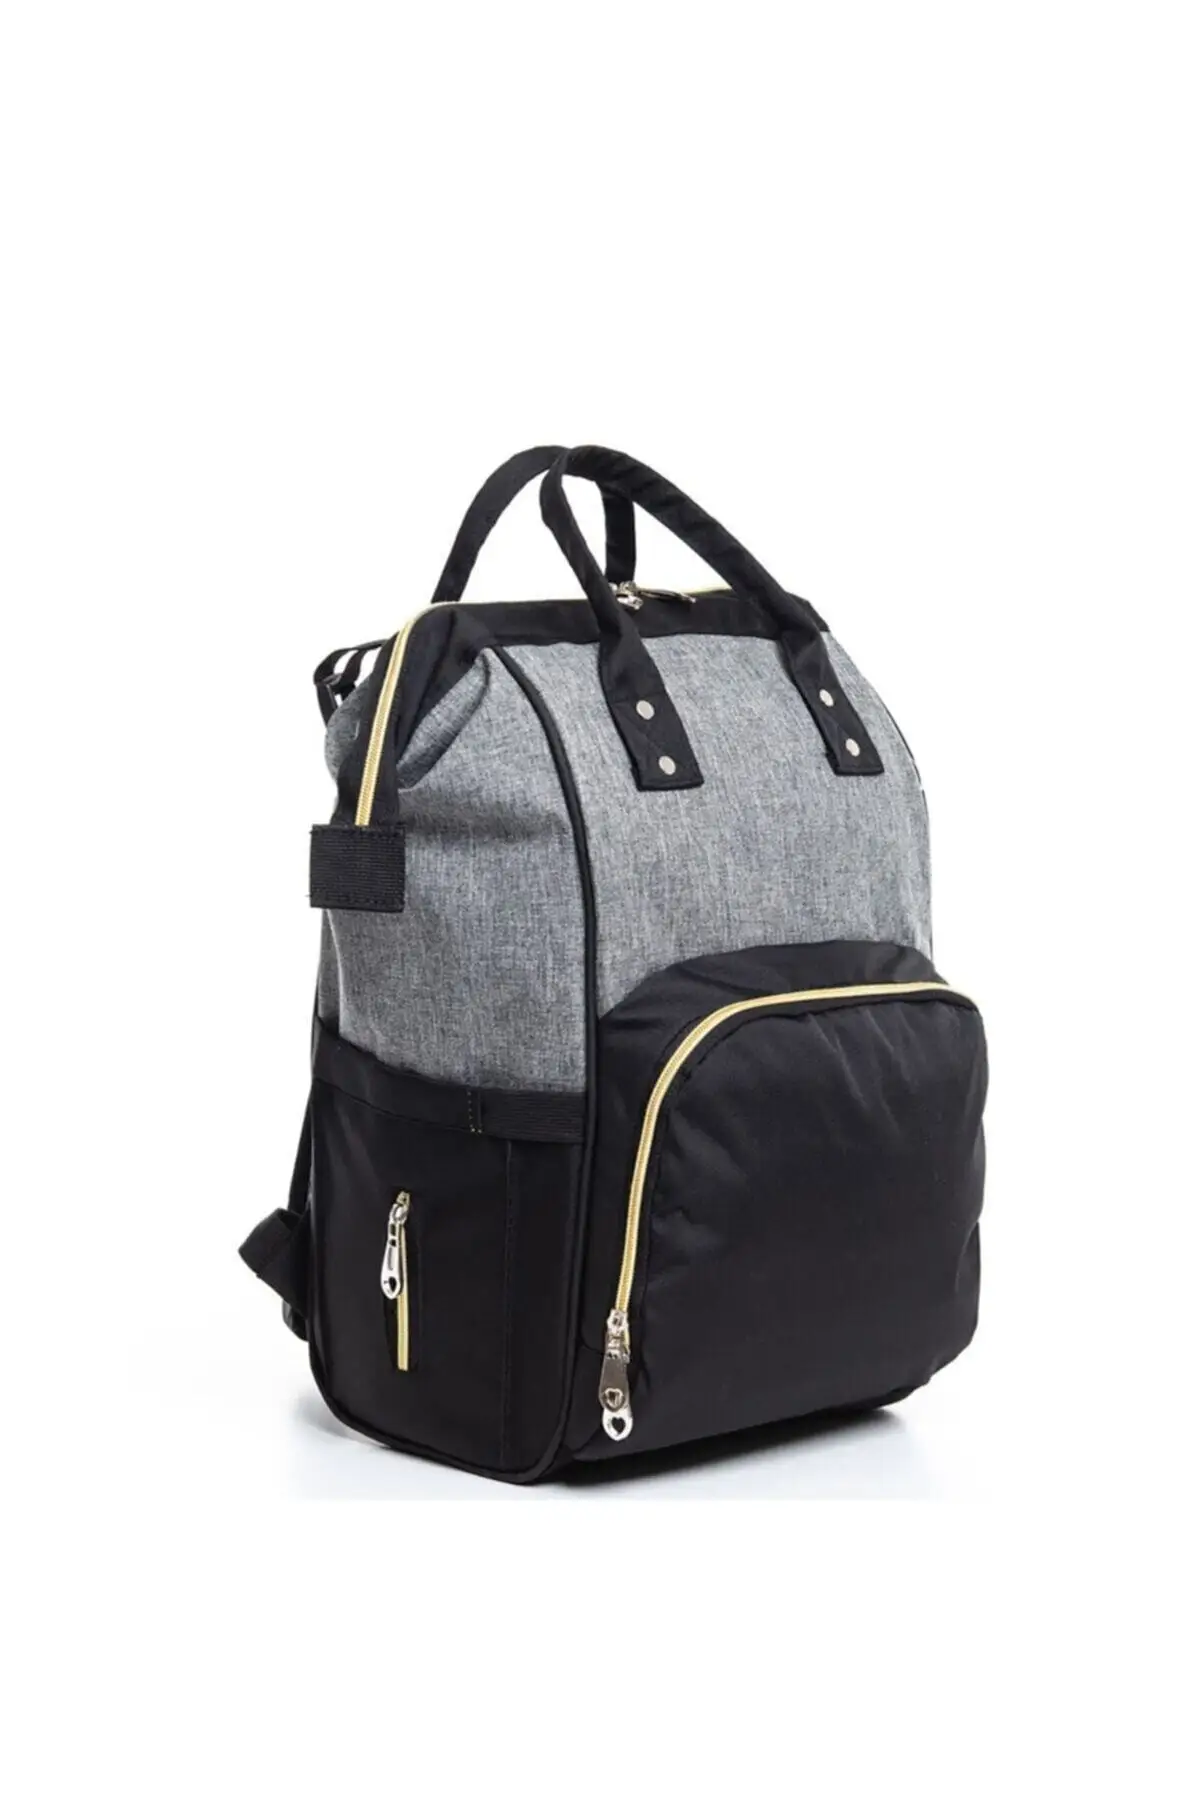 Baby Bag, Baby Mommy Backpack Black Gray Gold